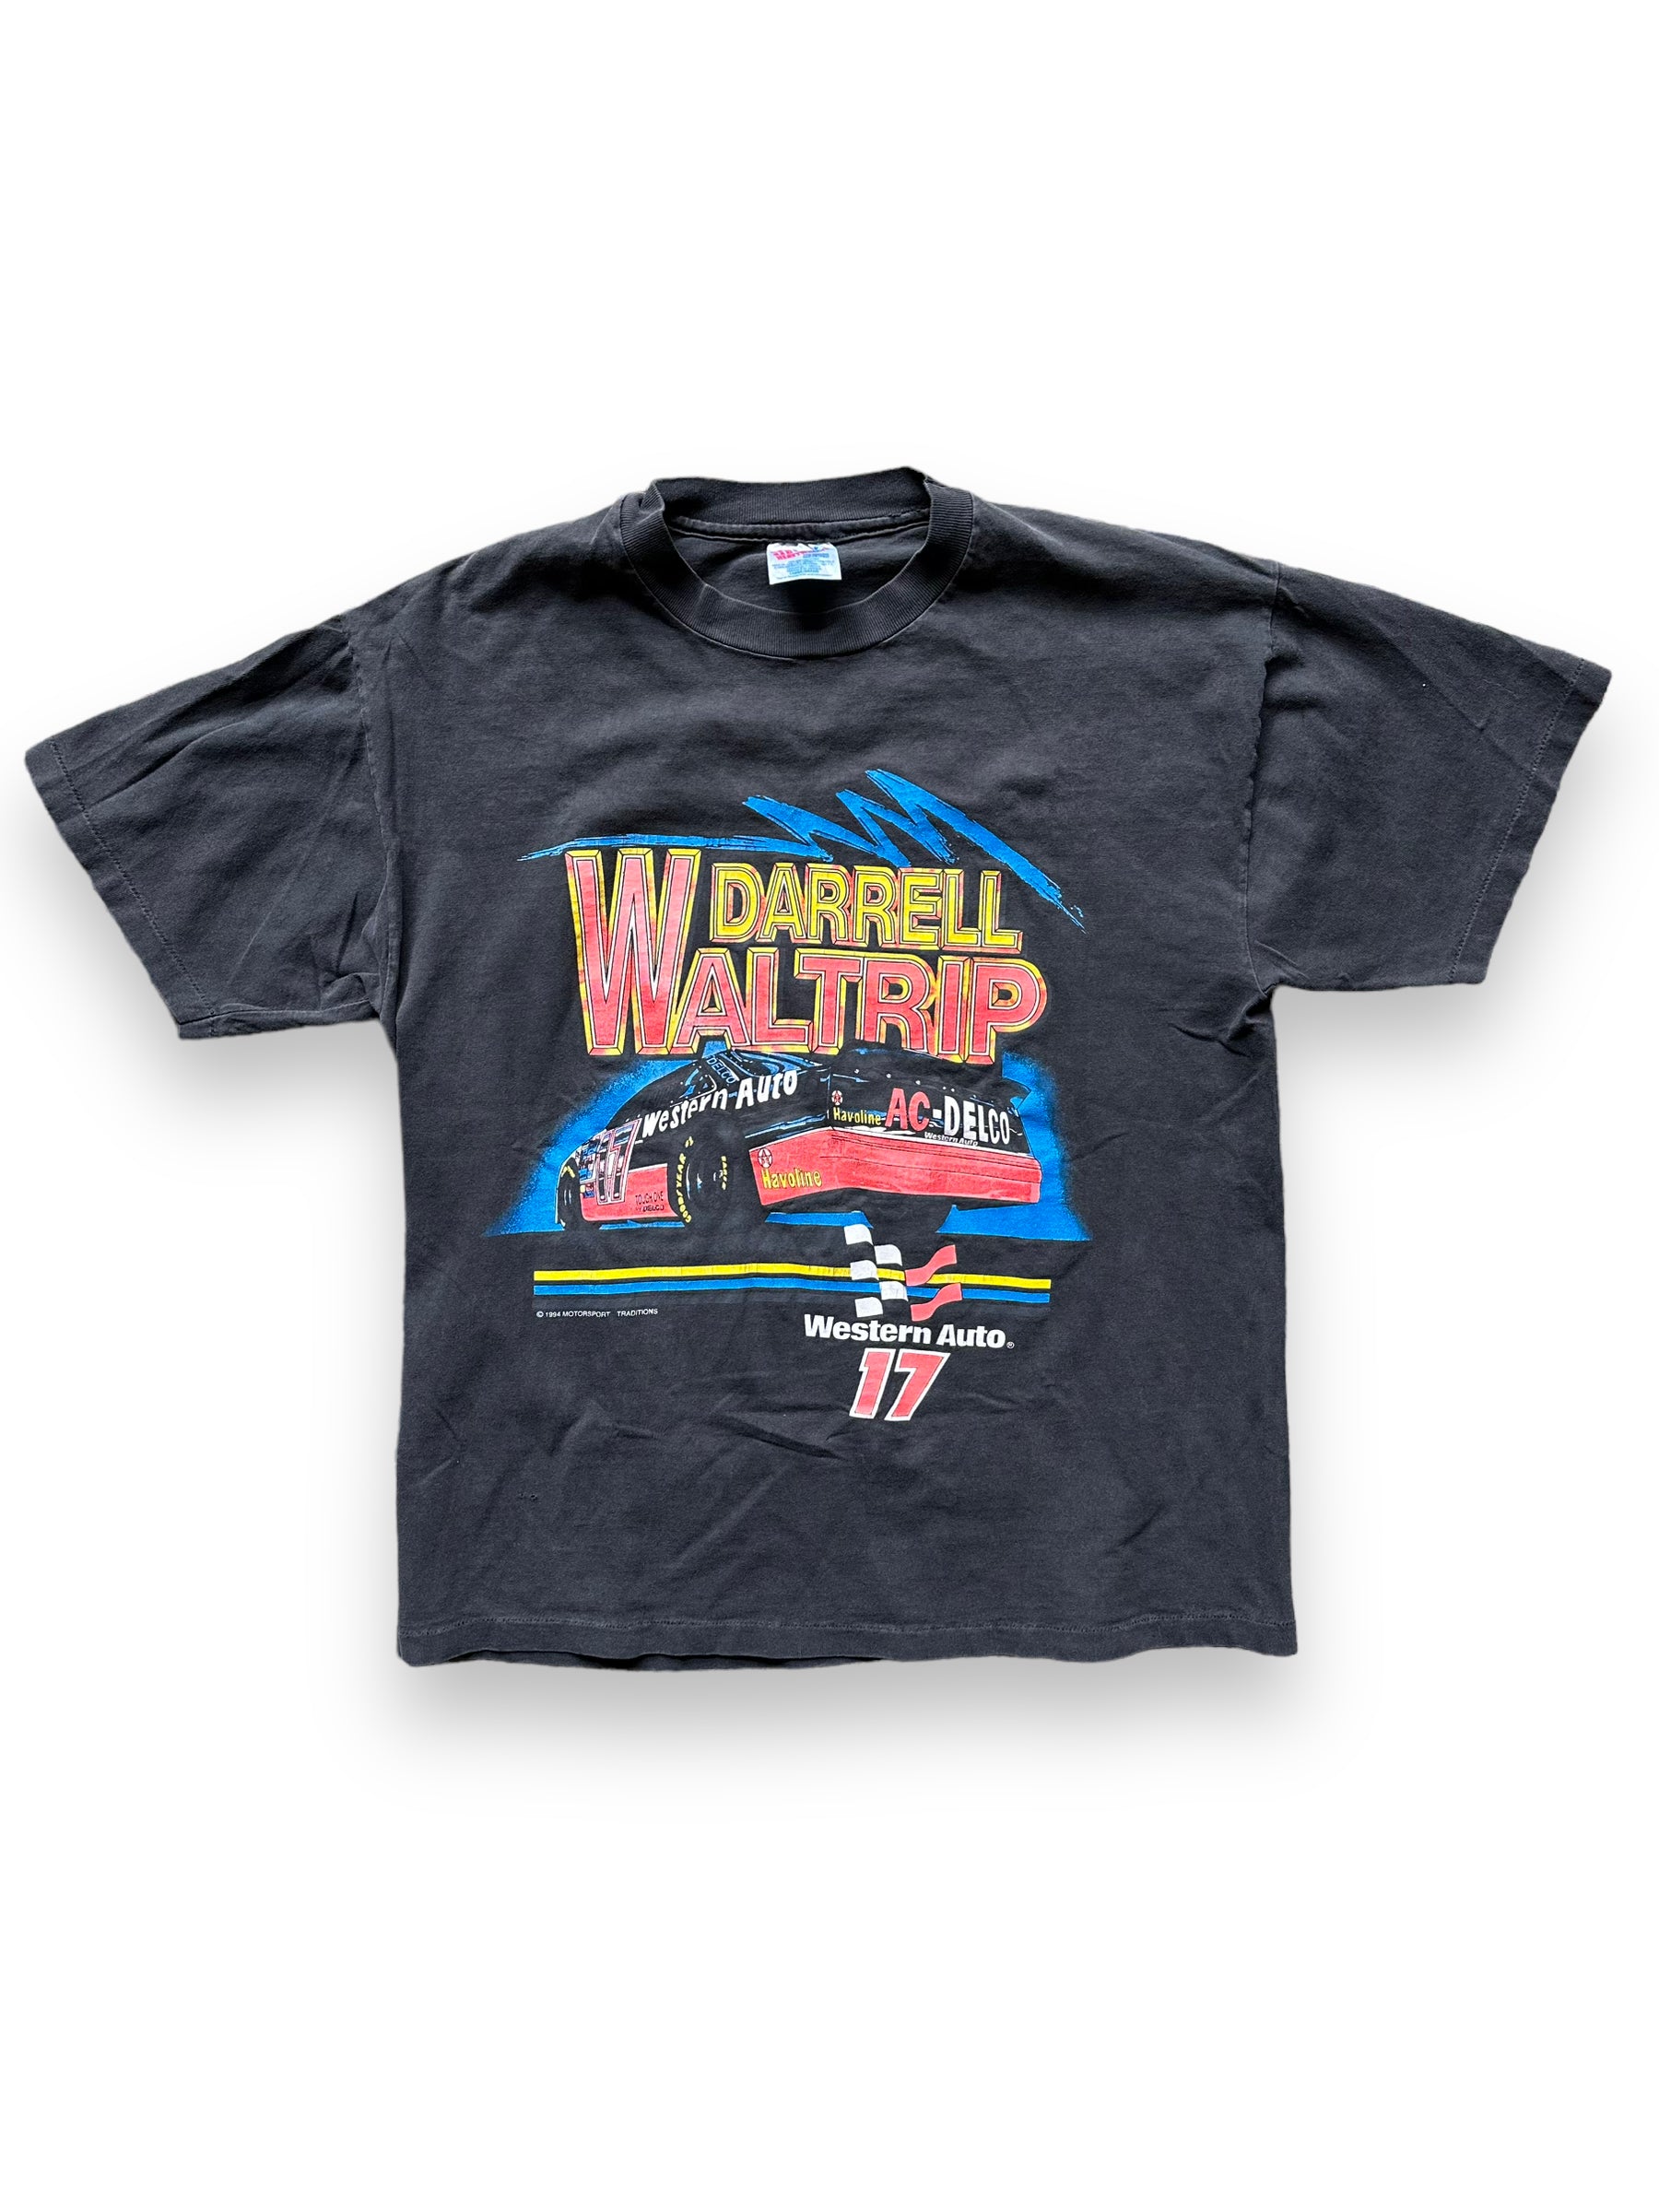 Front View of Vintage Darrell Waltrip Racing Tee Size L | Vintage NASCAR Tee | Barn Owl Vintage Seattle